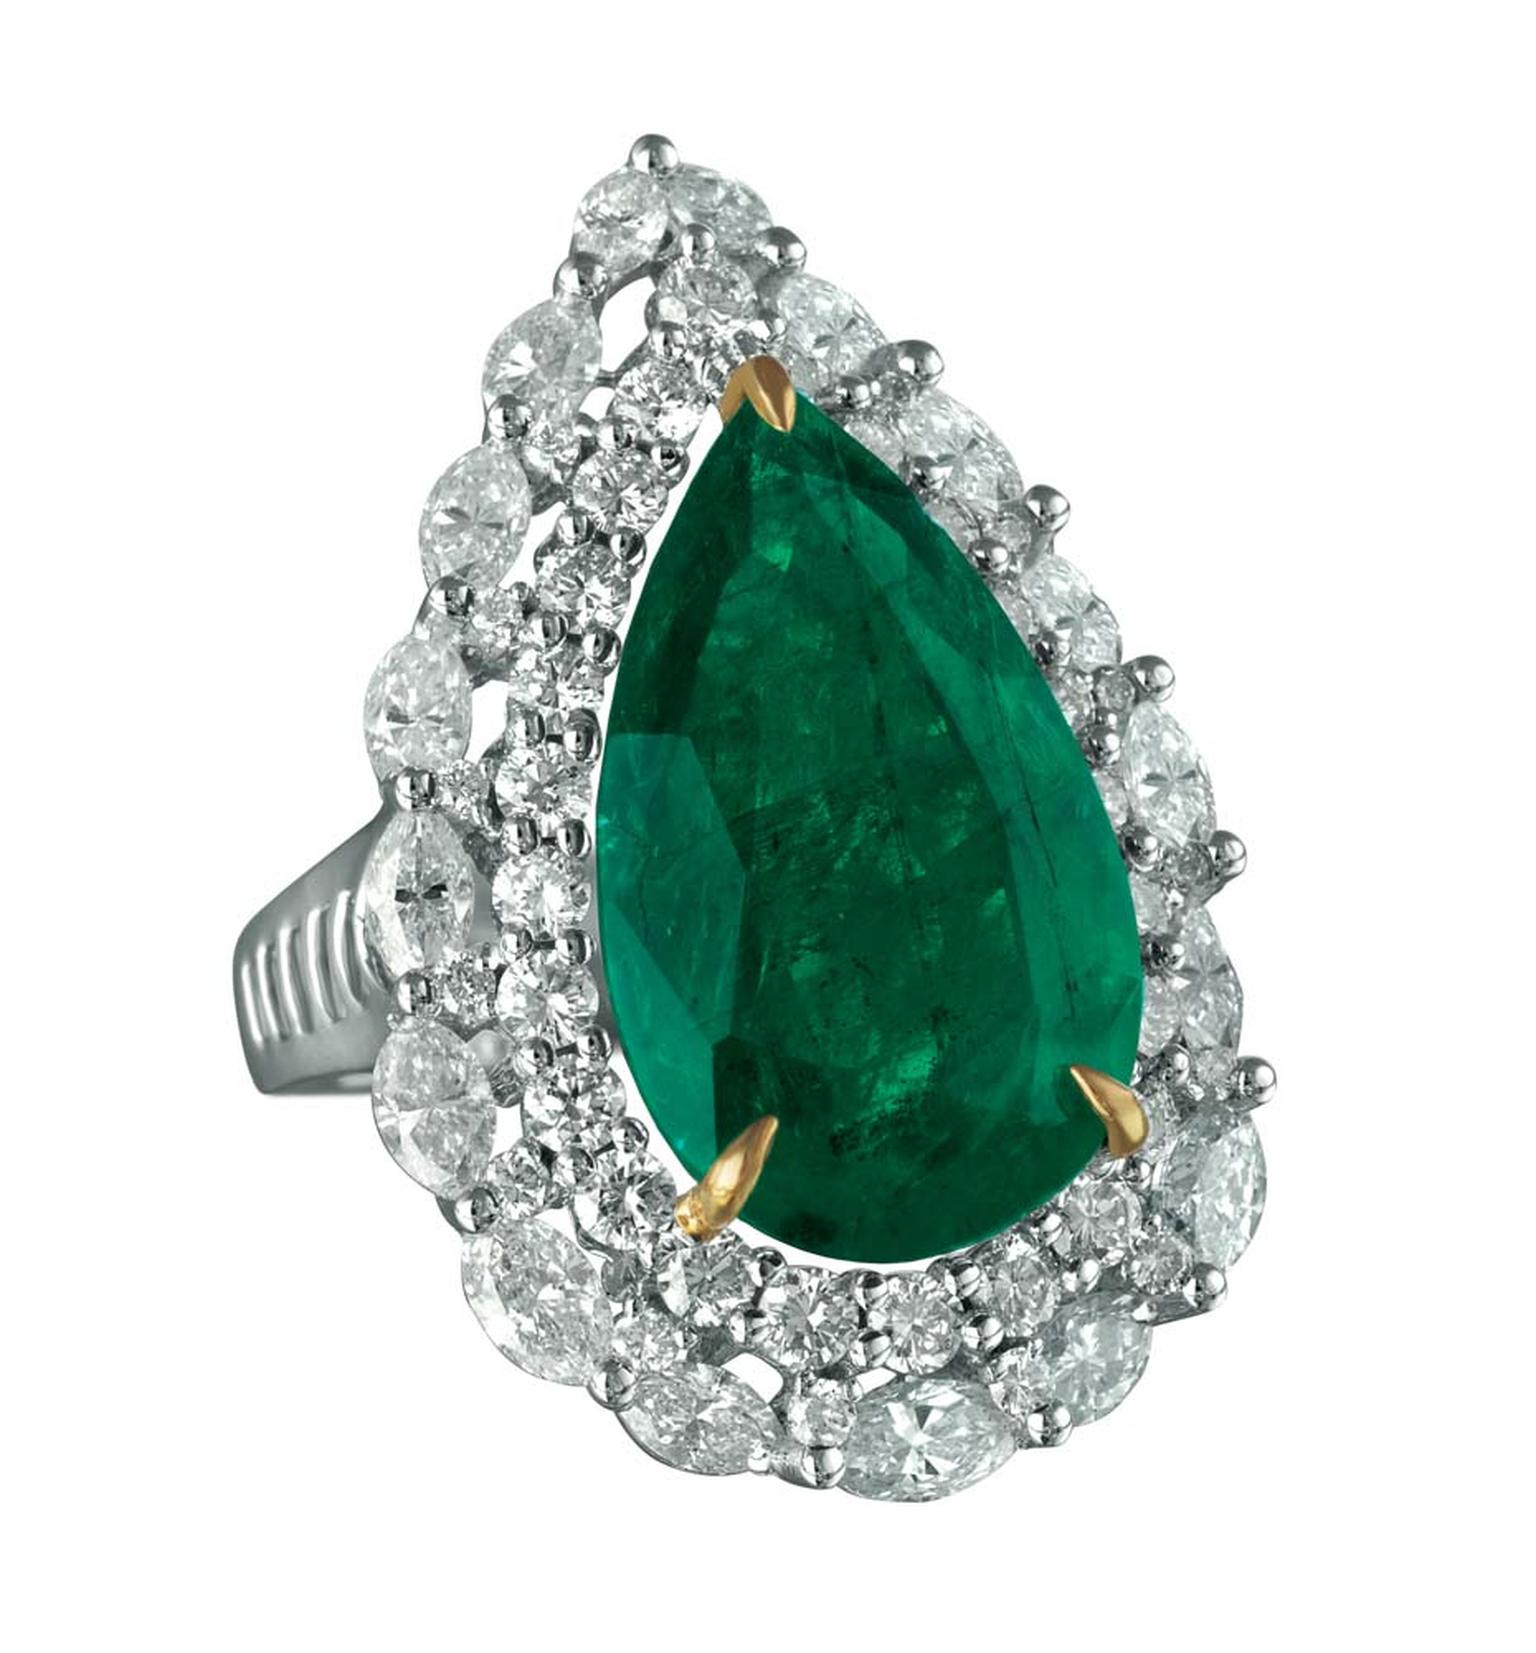 Luxury Indian jewellery brand MINAWALA launches new Festival of Emeralds collection